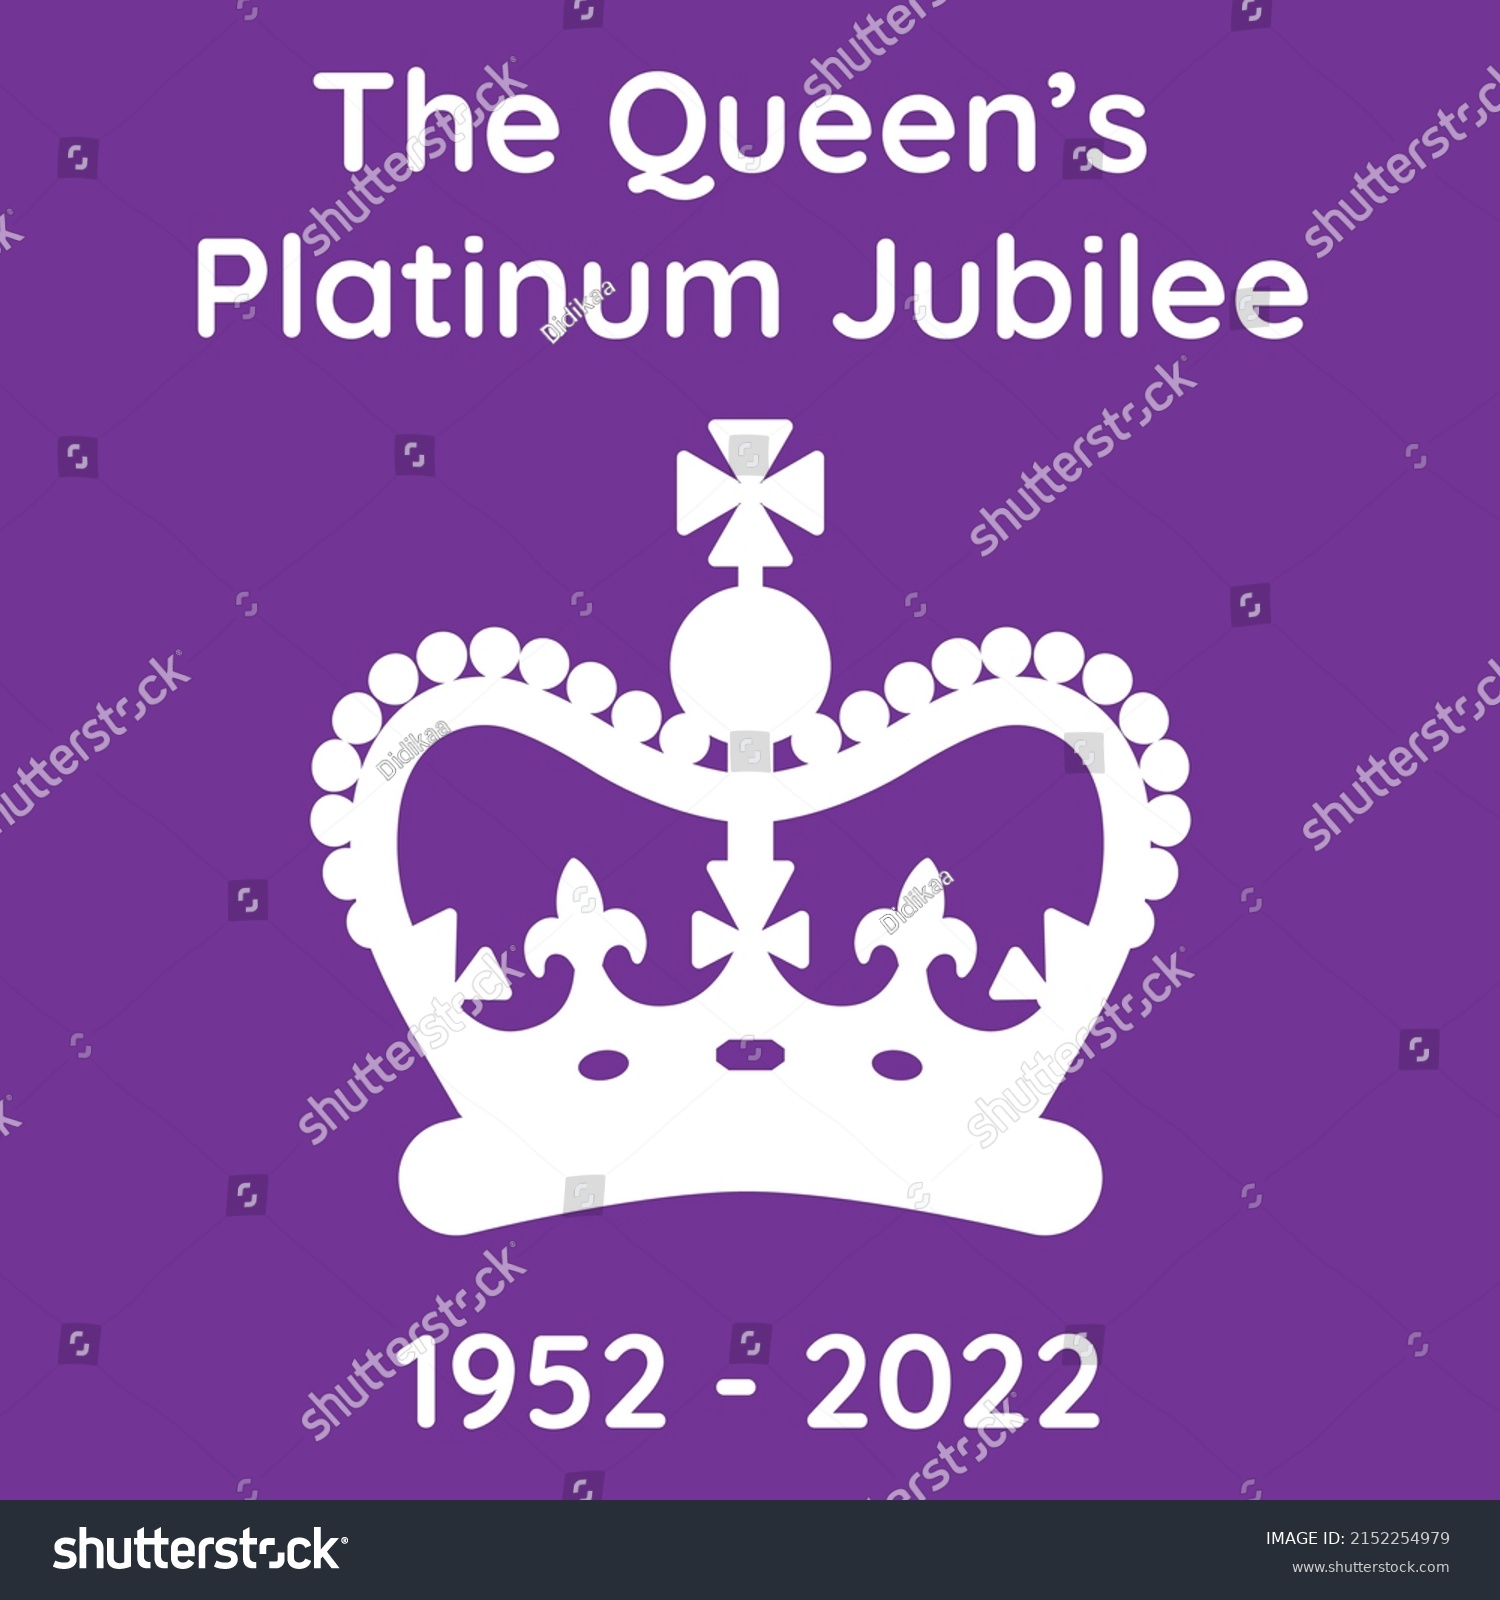 SVG of Poster of The Queen's Platinum Jubilee. 1952-2022. The Queen will become the first British Monarch to celebrate a Platinum Jubilee after 70 years of service.  svg